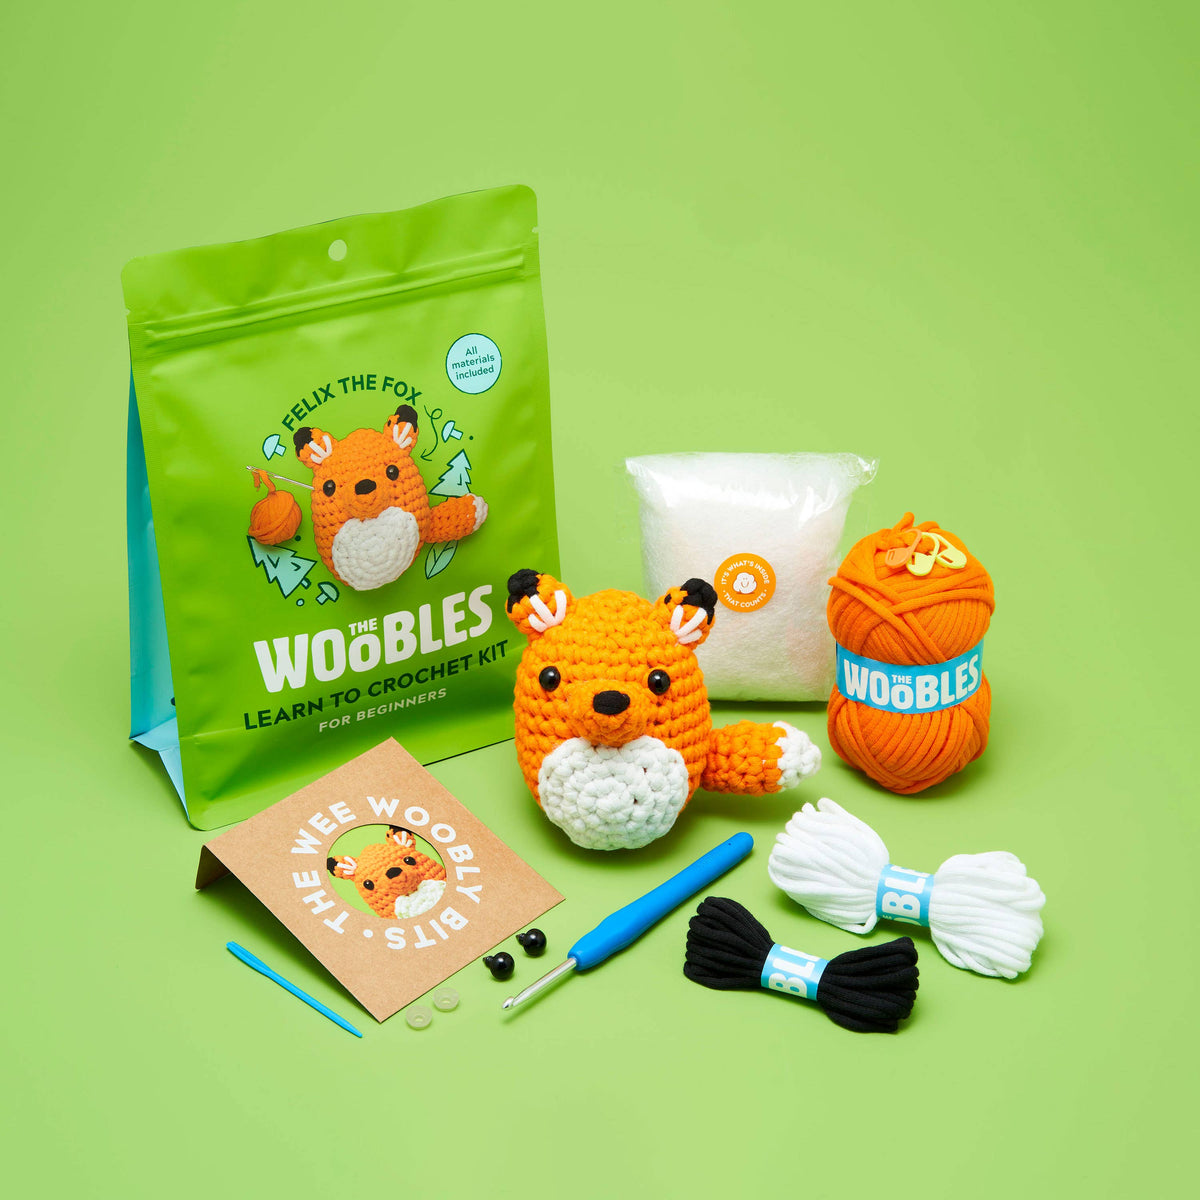 Fox Crochet kit from The Woobles